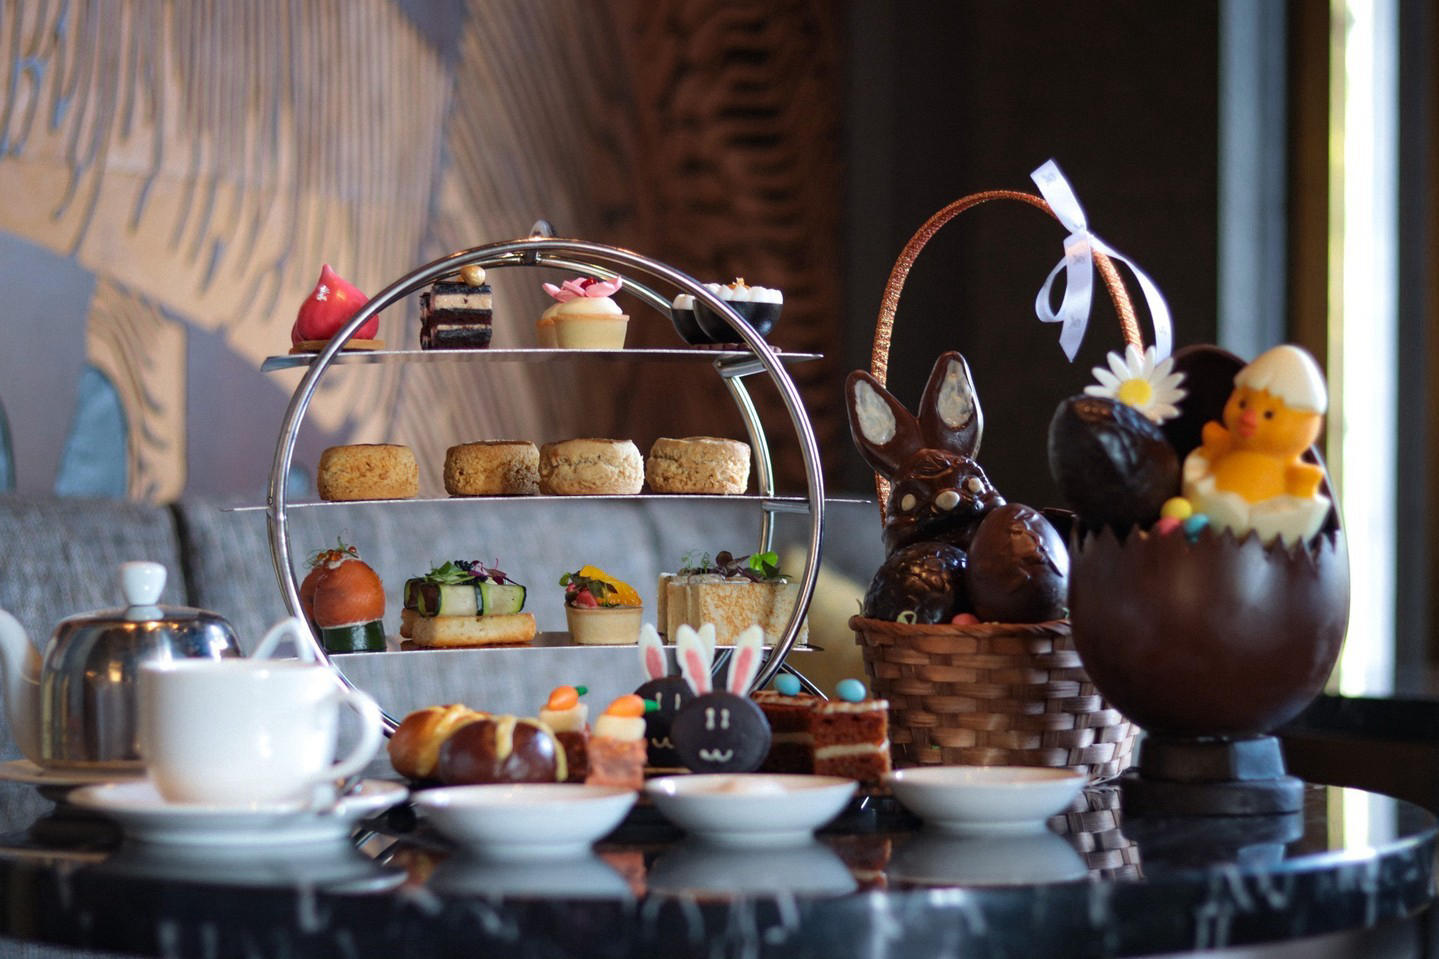 Indulge in an exquisite afternoon tea experience specially curated for Easter at The St